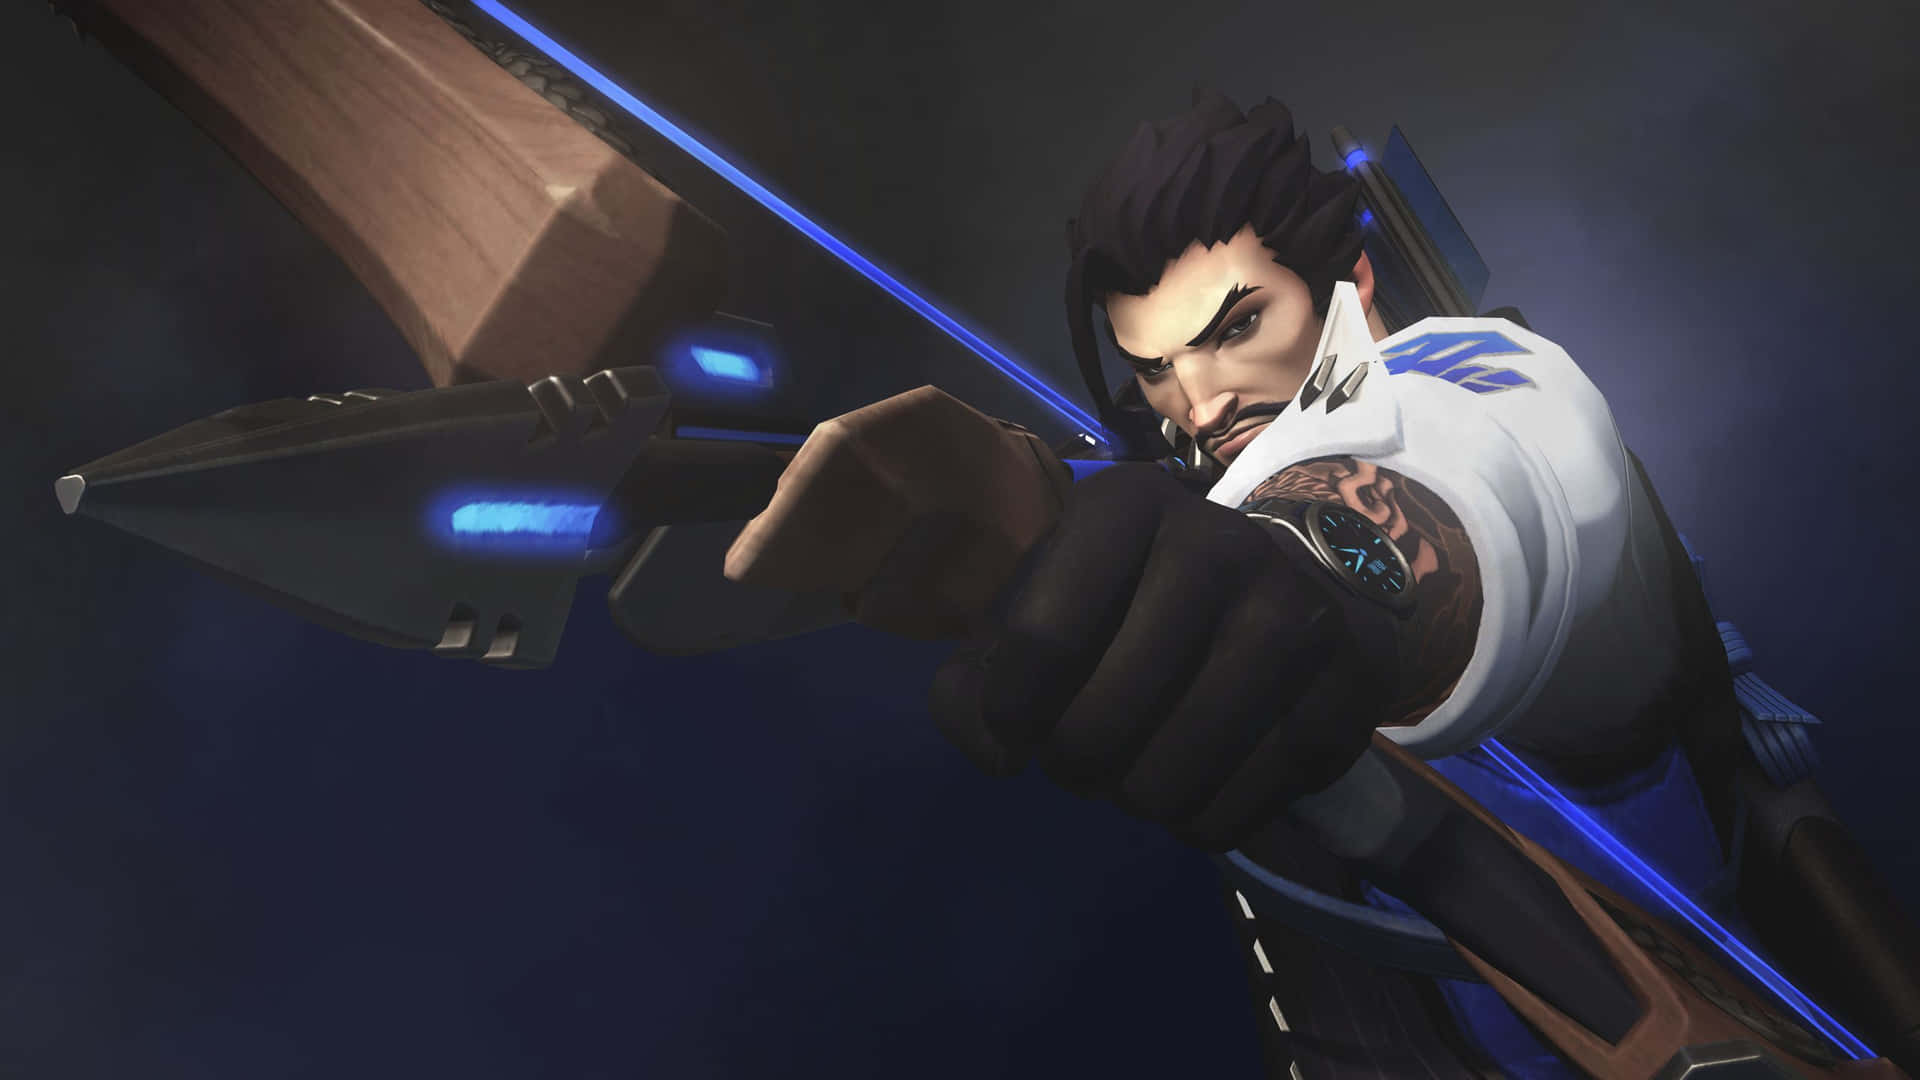 Overwatch Hanzo: Master of the Bow Wallpaper